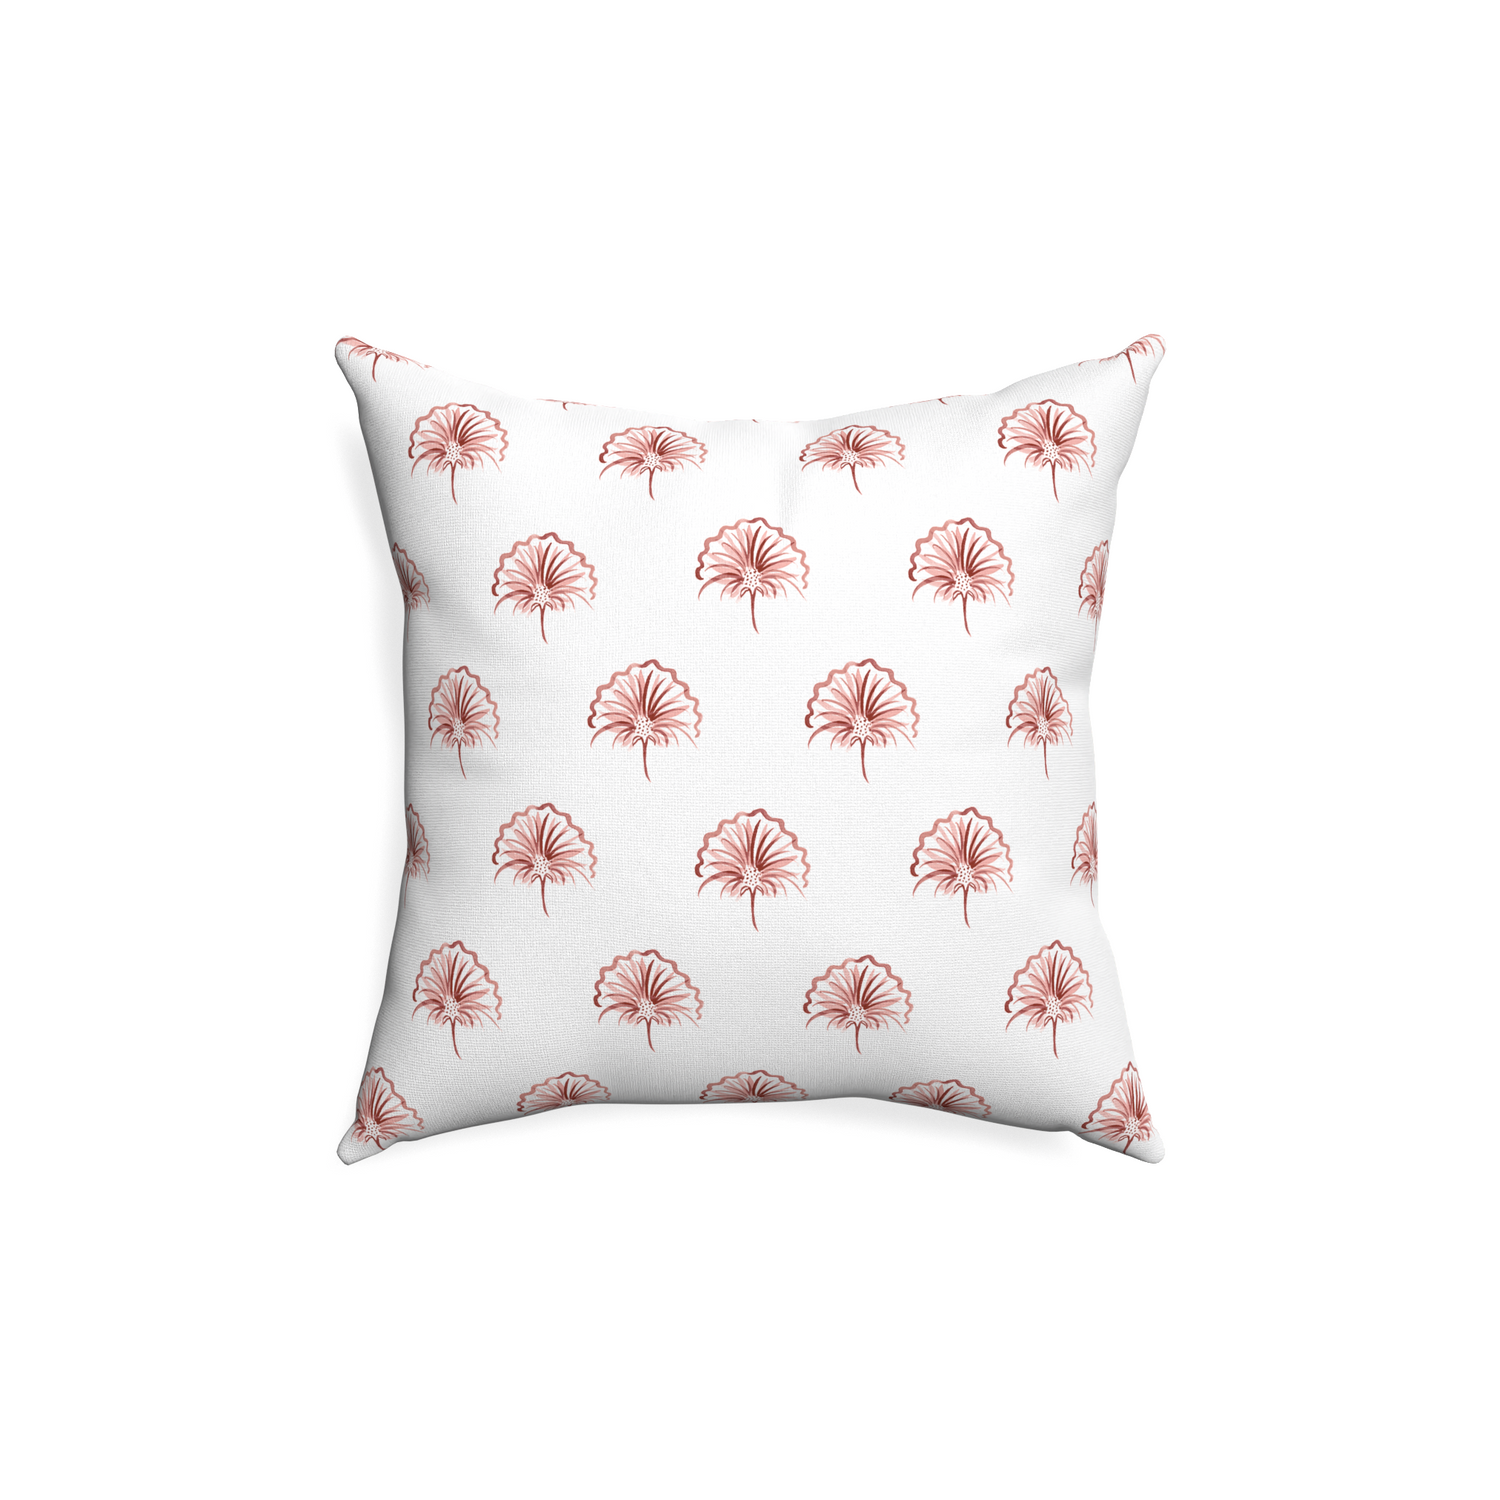 18-square penelope rose custom pillow with none on white background